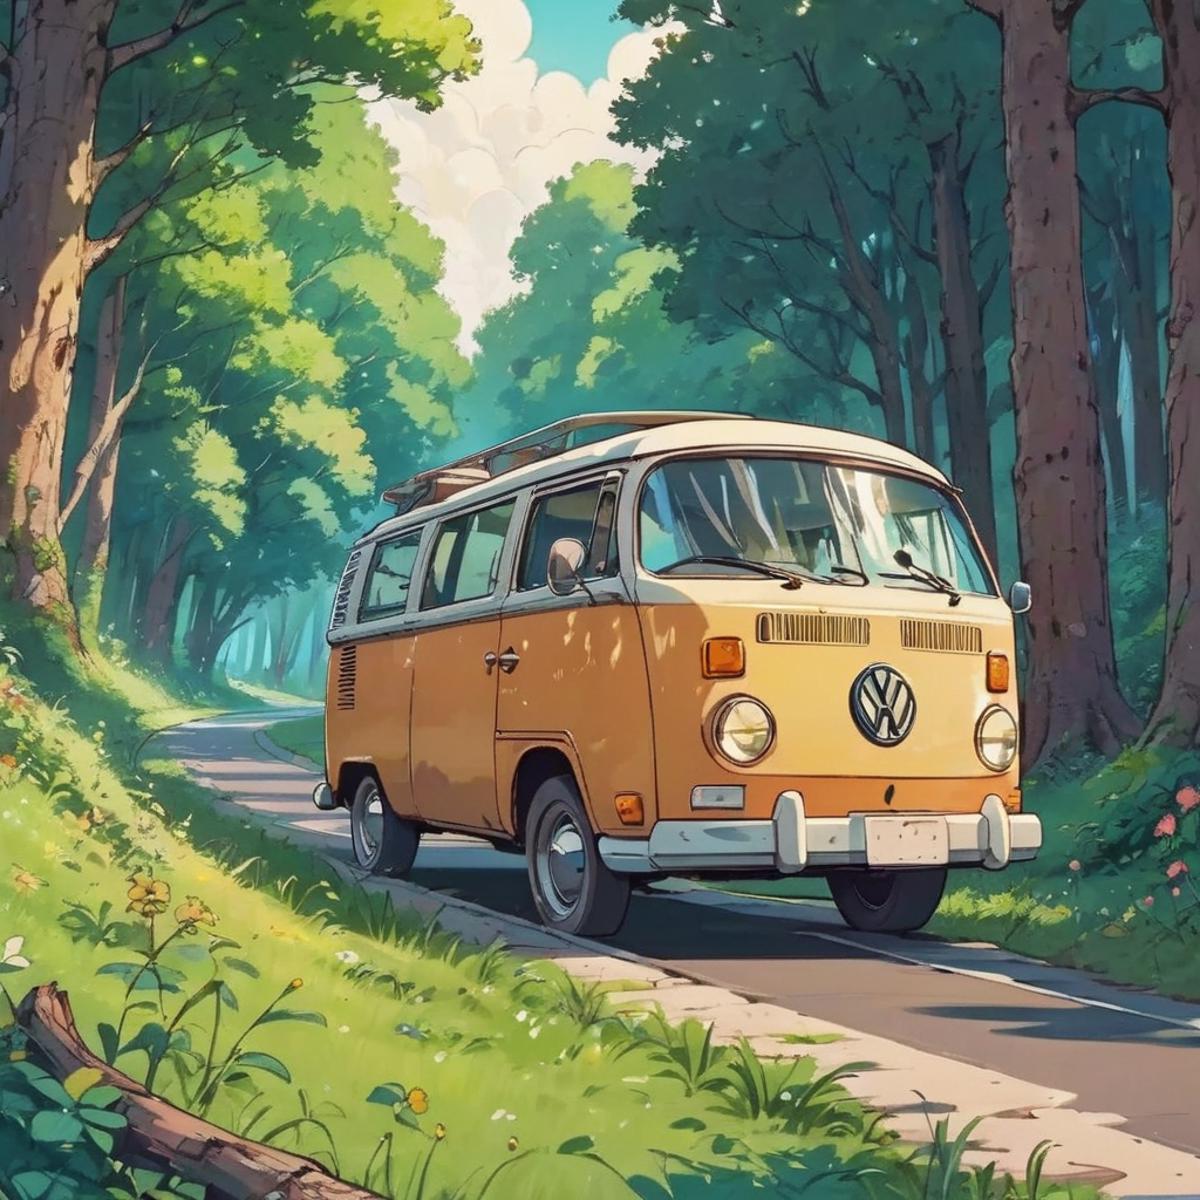 A yellow Volkswagen van driving down a road in a forest.